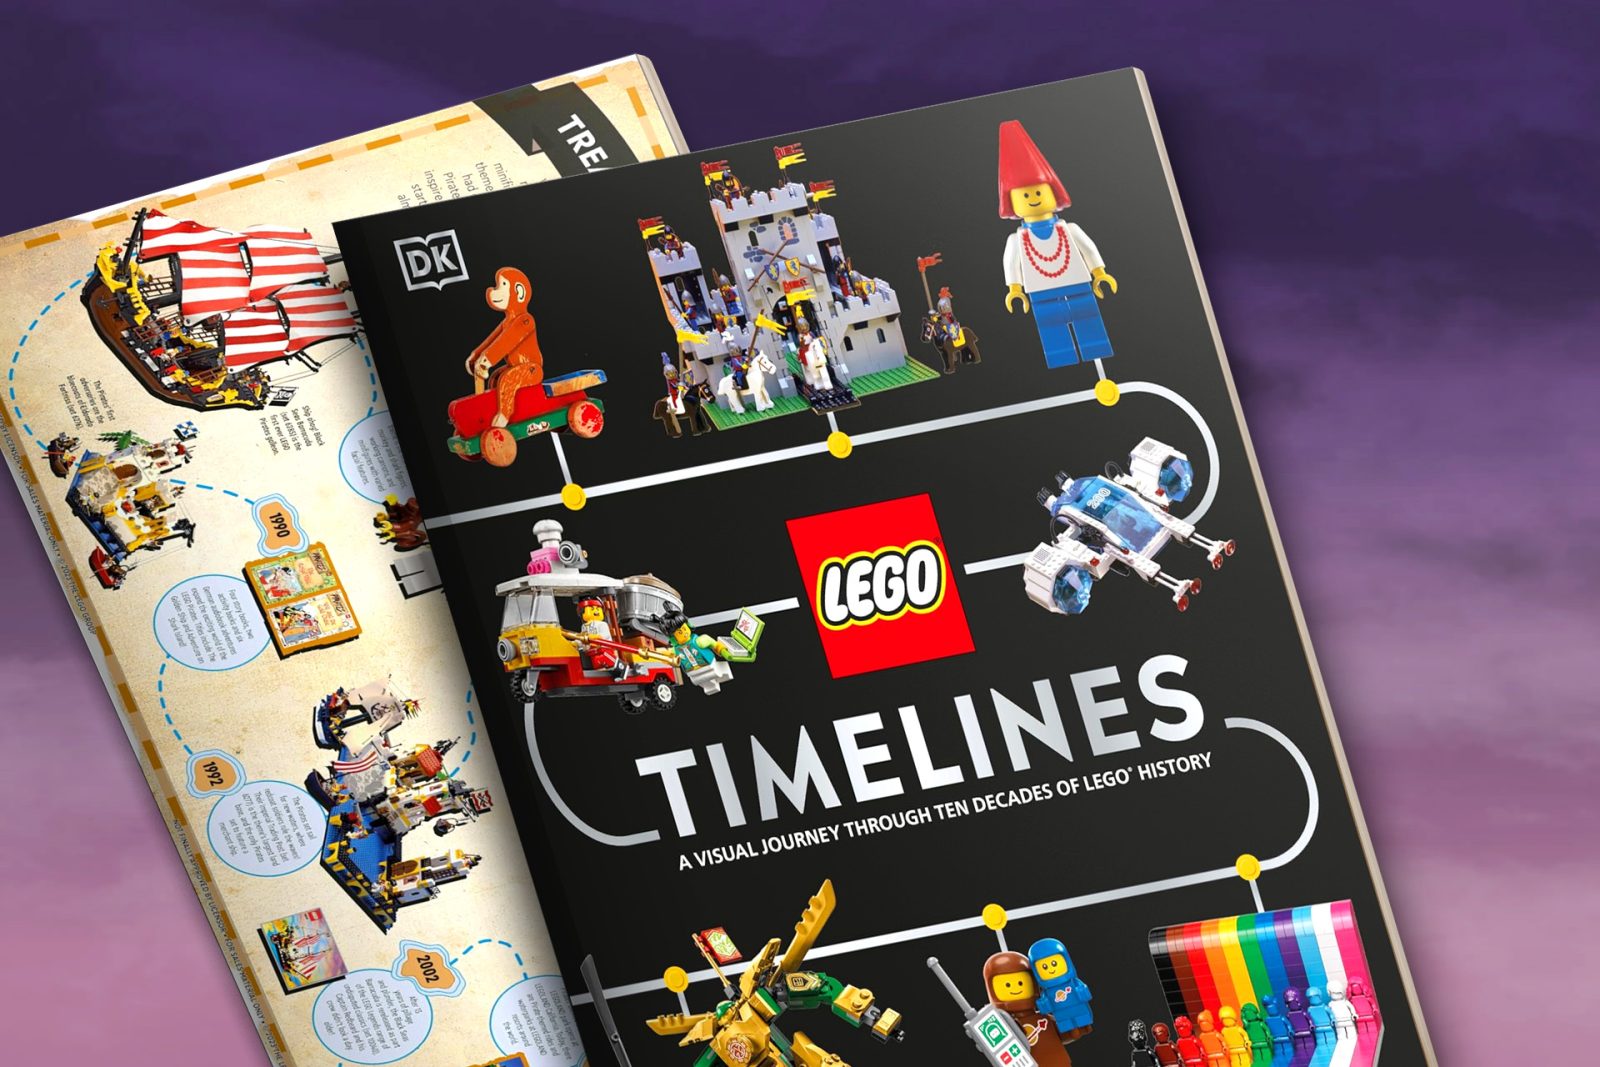 Pages from "LEGO Timelines" by Simon Hugo